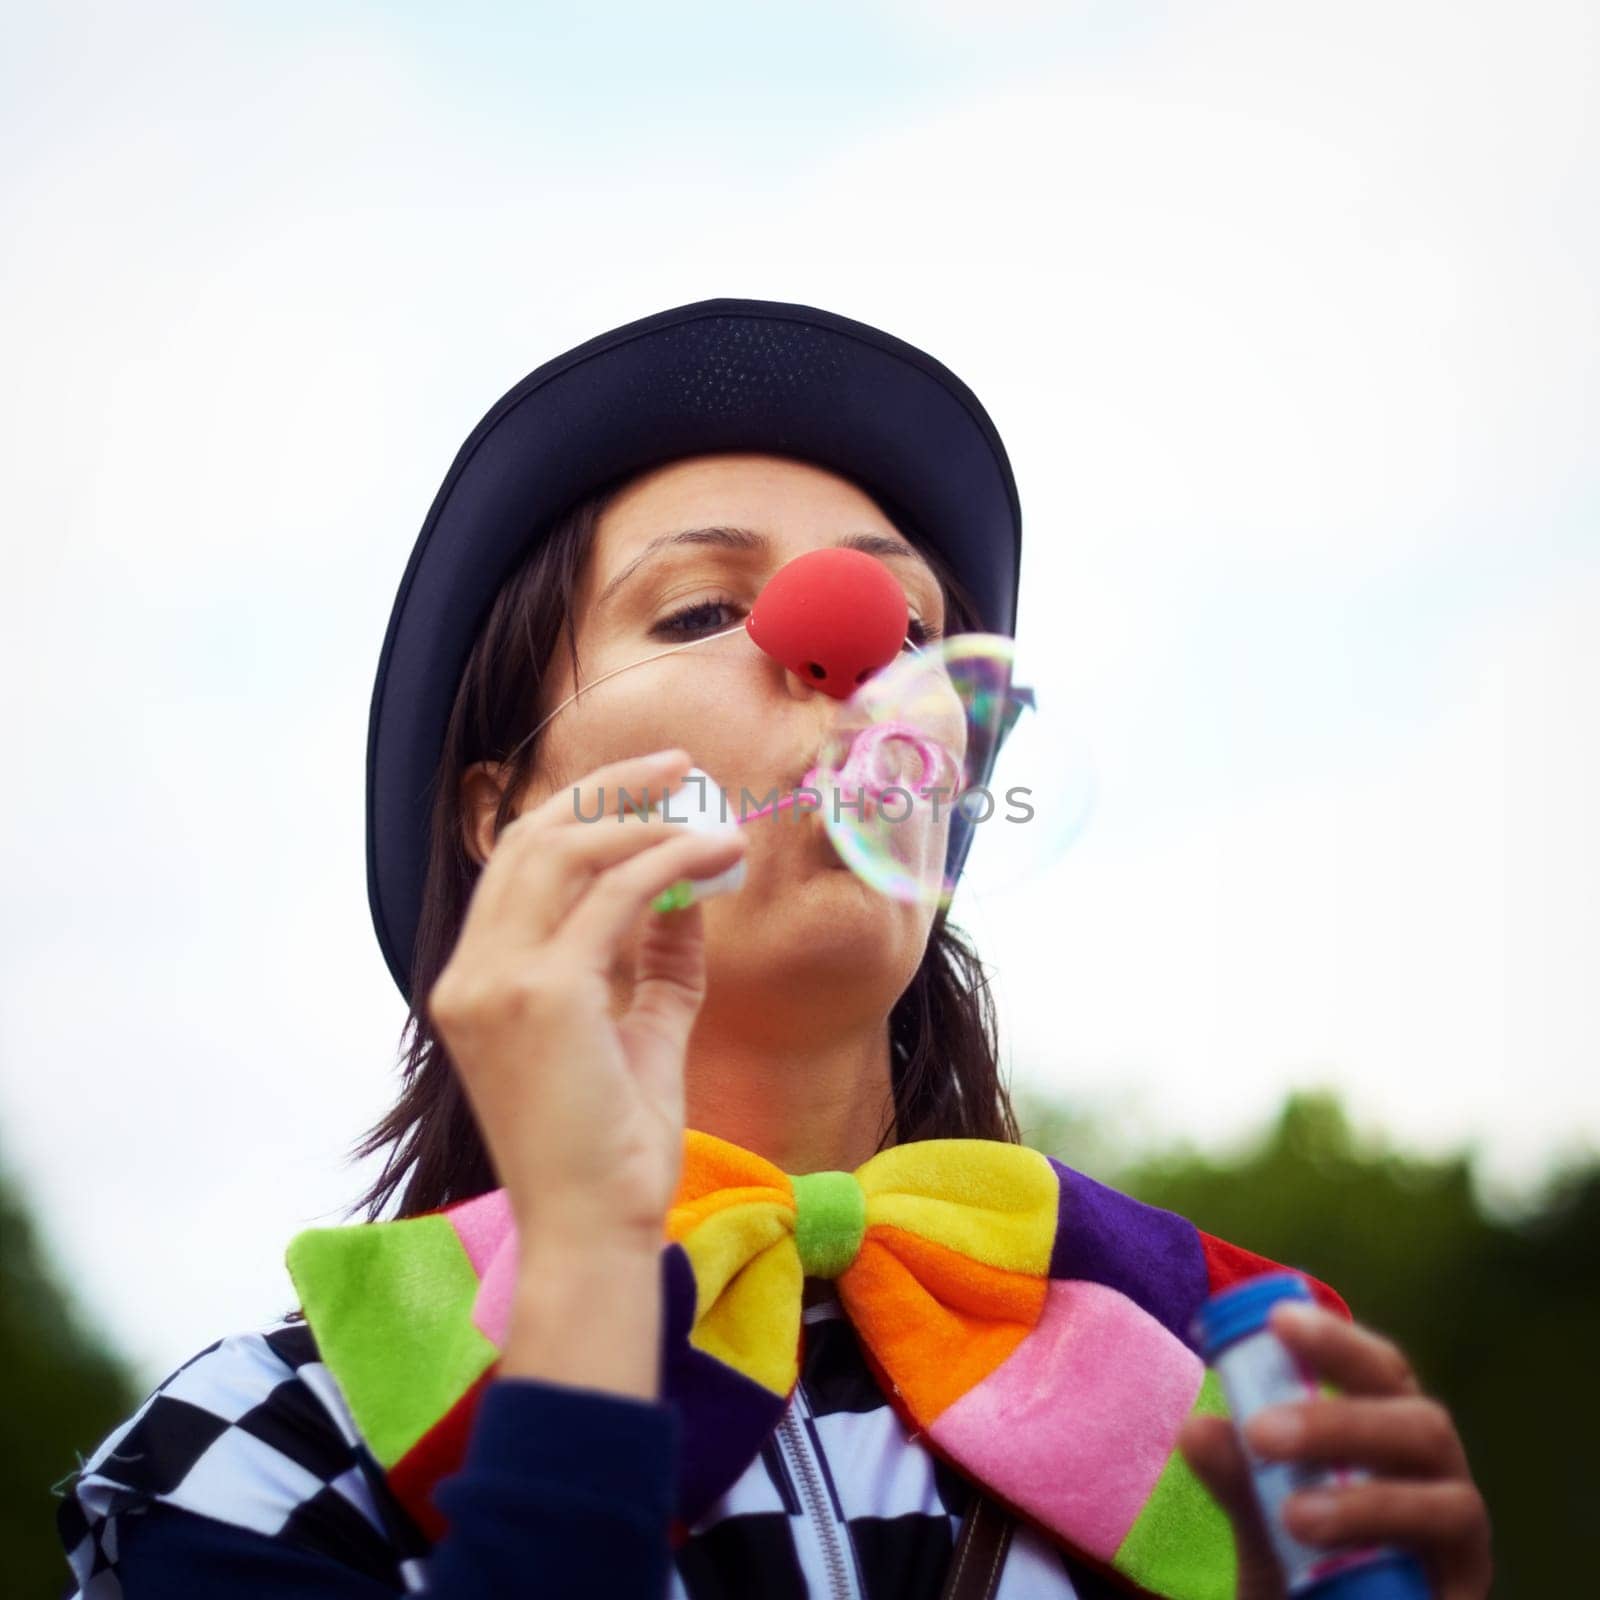 Clown blowing bubbles at outdoor festival for fun, fantasy and summer adventure in nature. Face of person, street performer or circus character in park with creative color at happy carnival event. by YuriArcurs